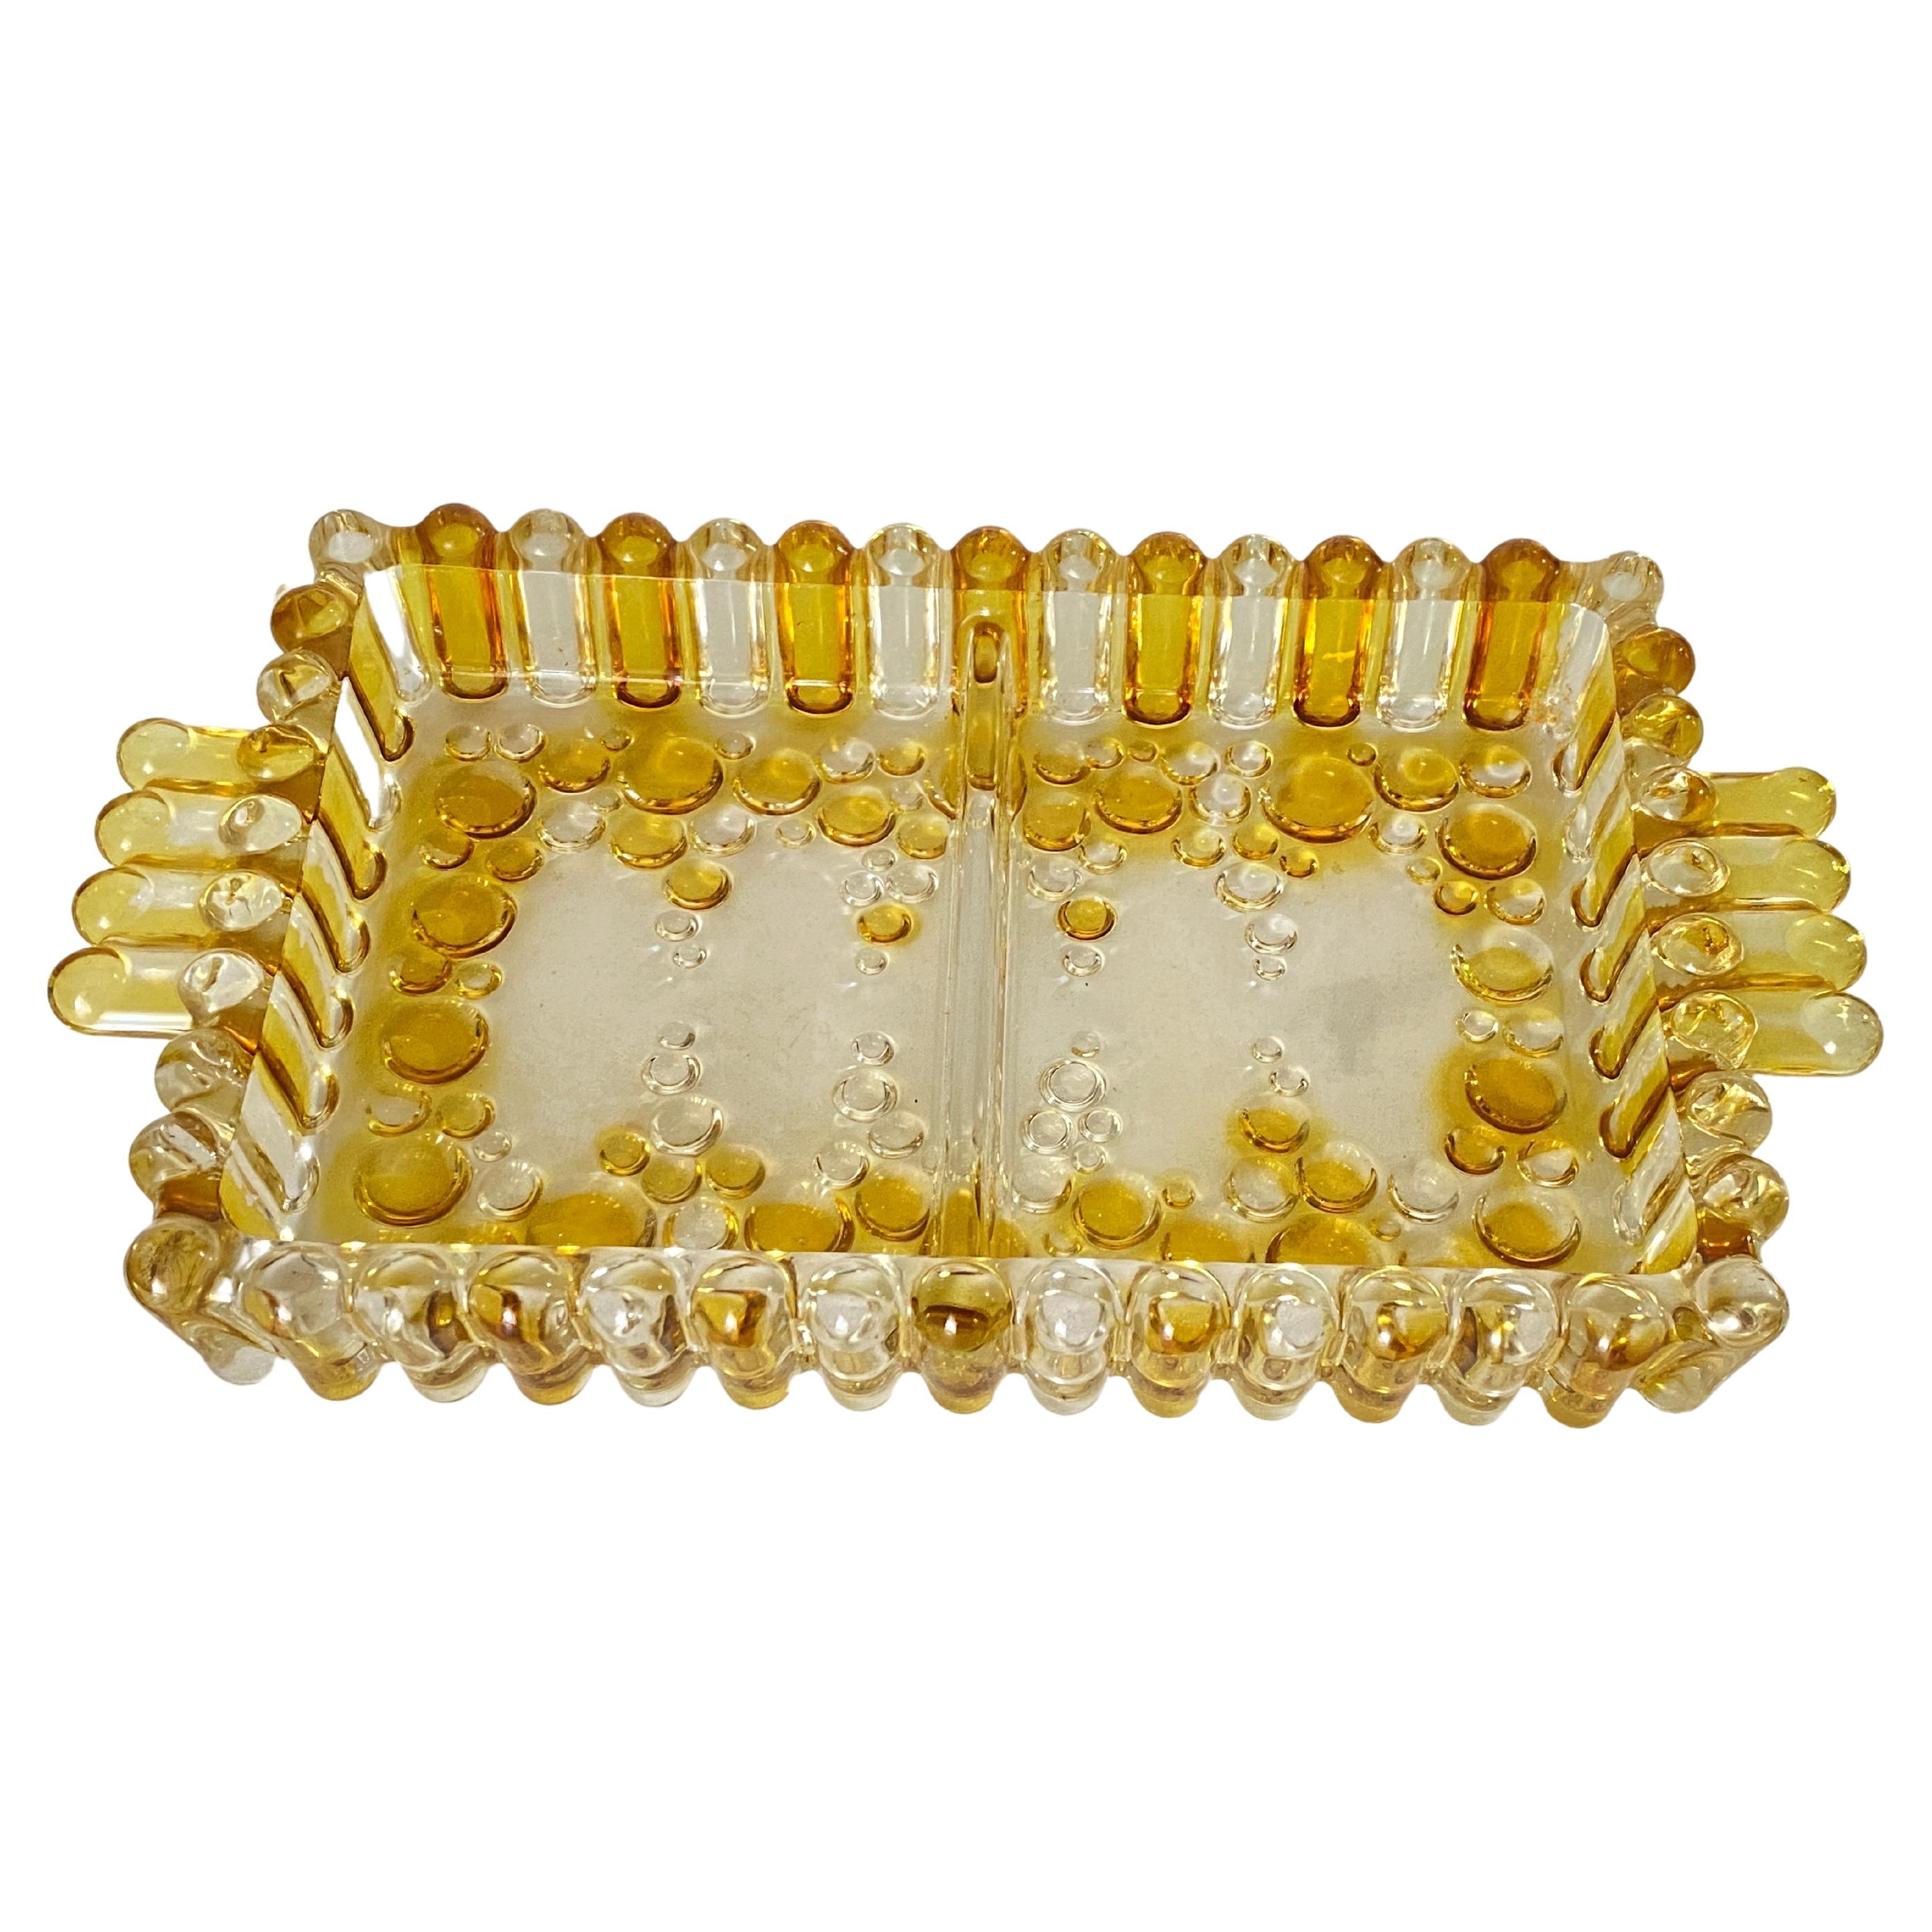 Art Deco Glass Dish / Vide-Poche with Colred Glass Bubles, France, circa 1940 For Sale